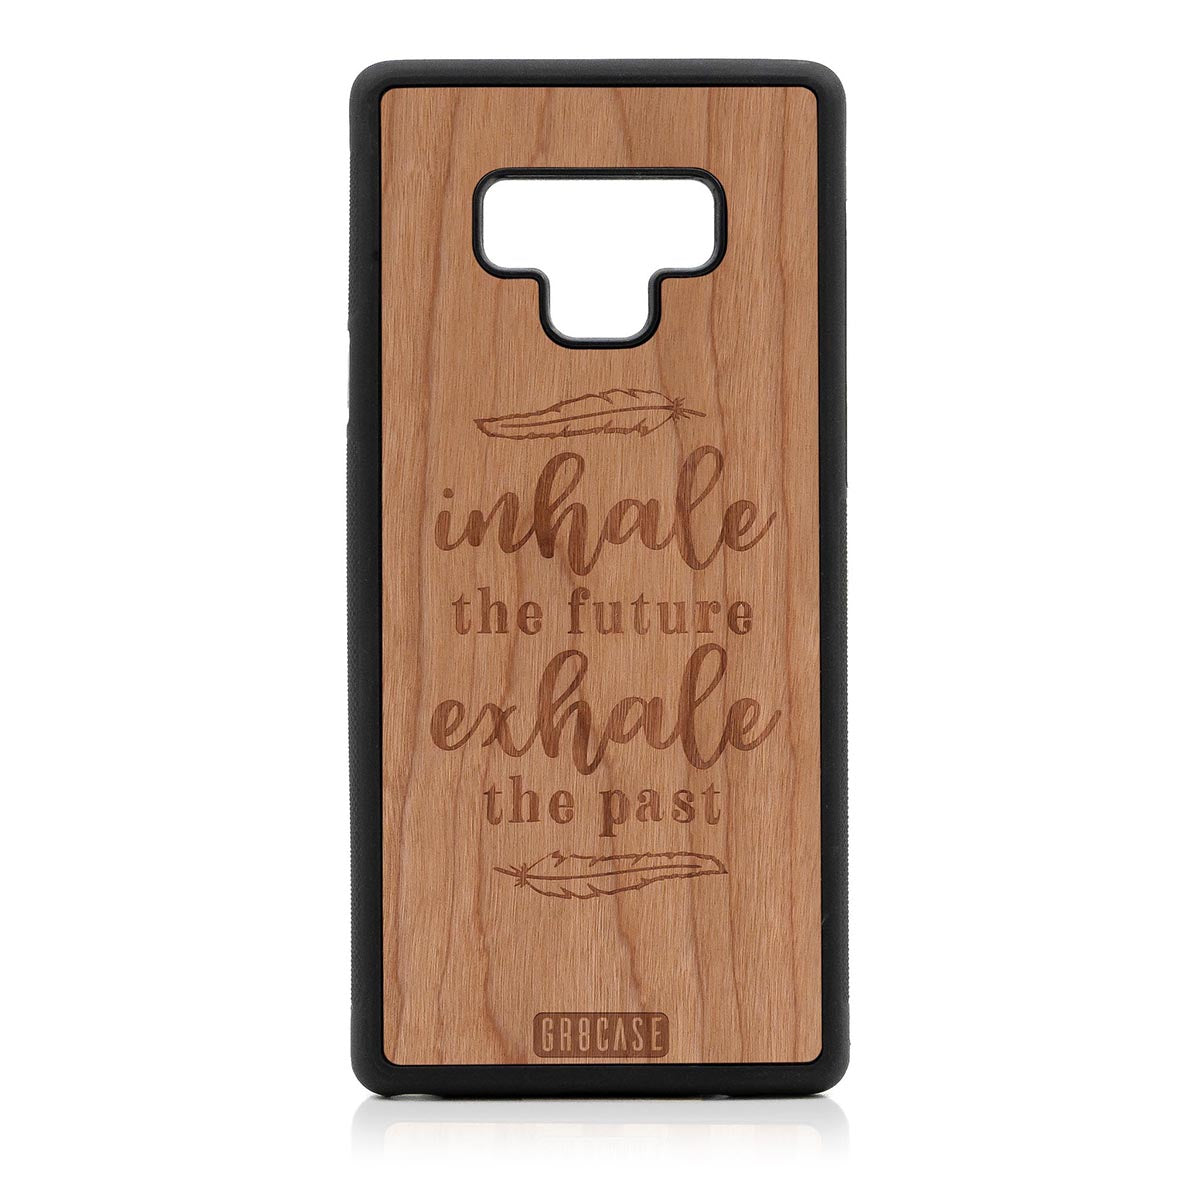 Inhale The Future Exhale The Past Design Wood Case Samsung Galaxy Note 9 by GR8CASE